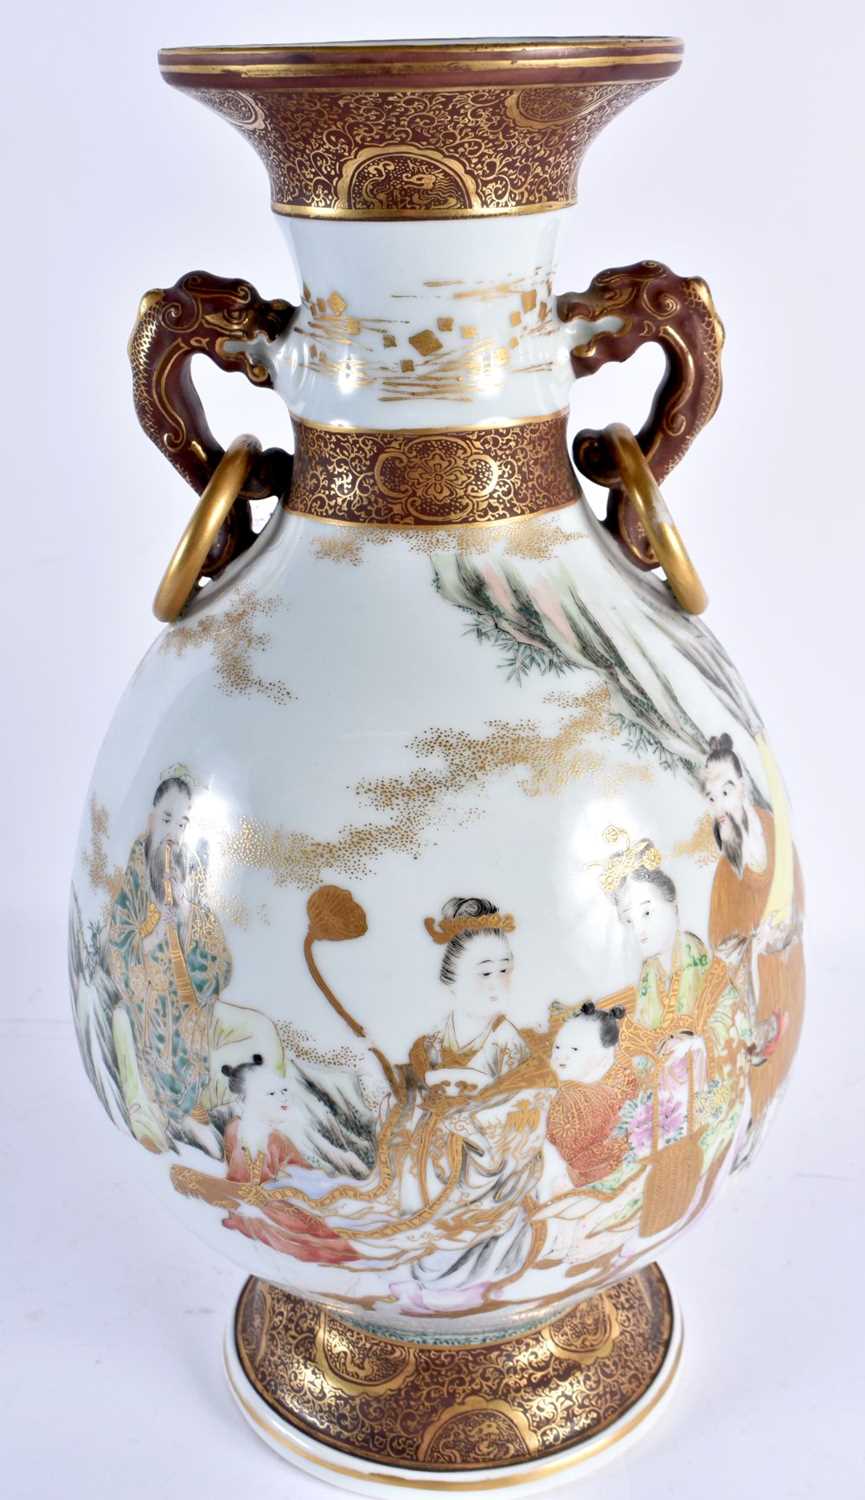 A LARGE 19TH CENTURY JAPANESE MEIJI PERIOD TWIN HANDLED KUTANI PORCELAIN VASE painted with figures - Image 5 of 21